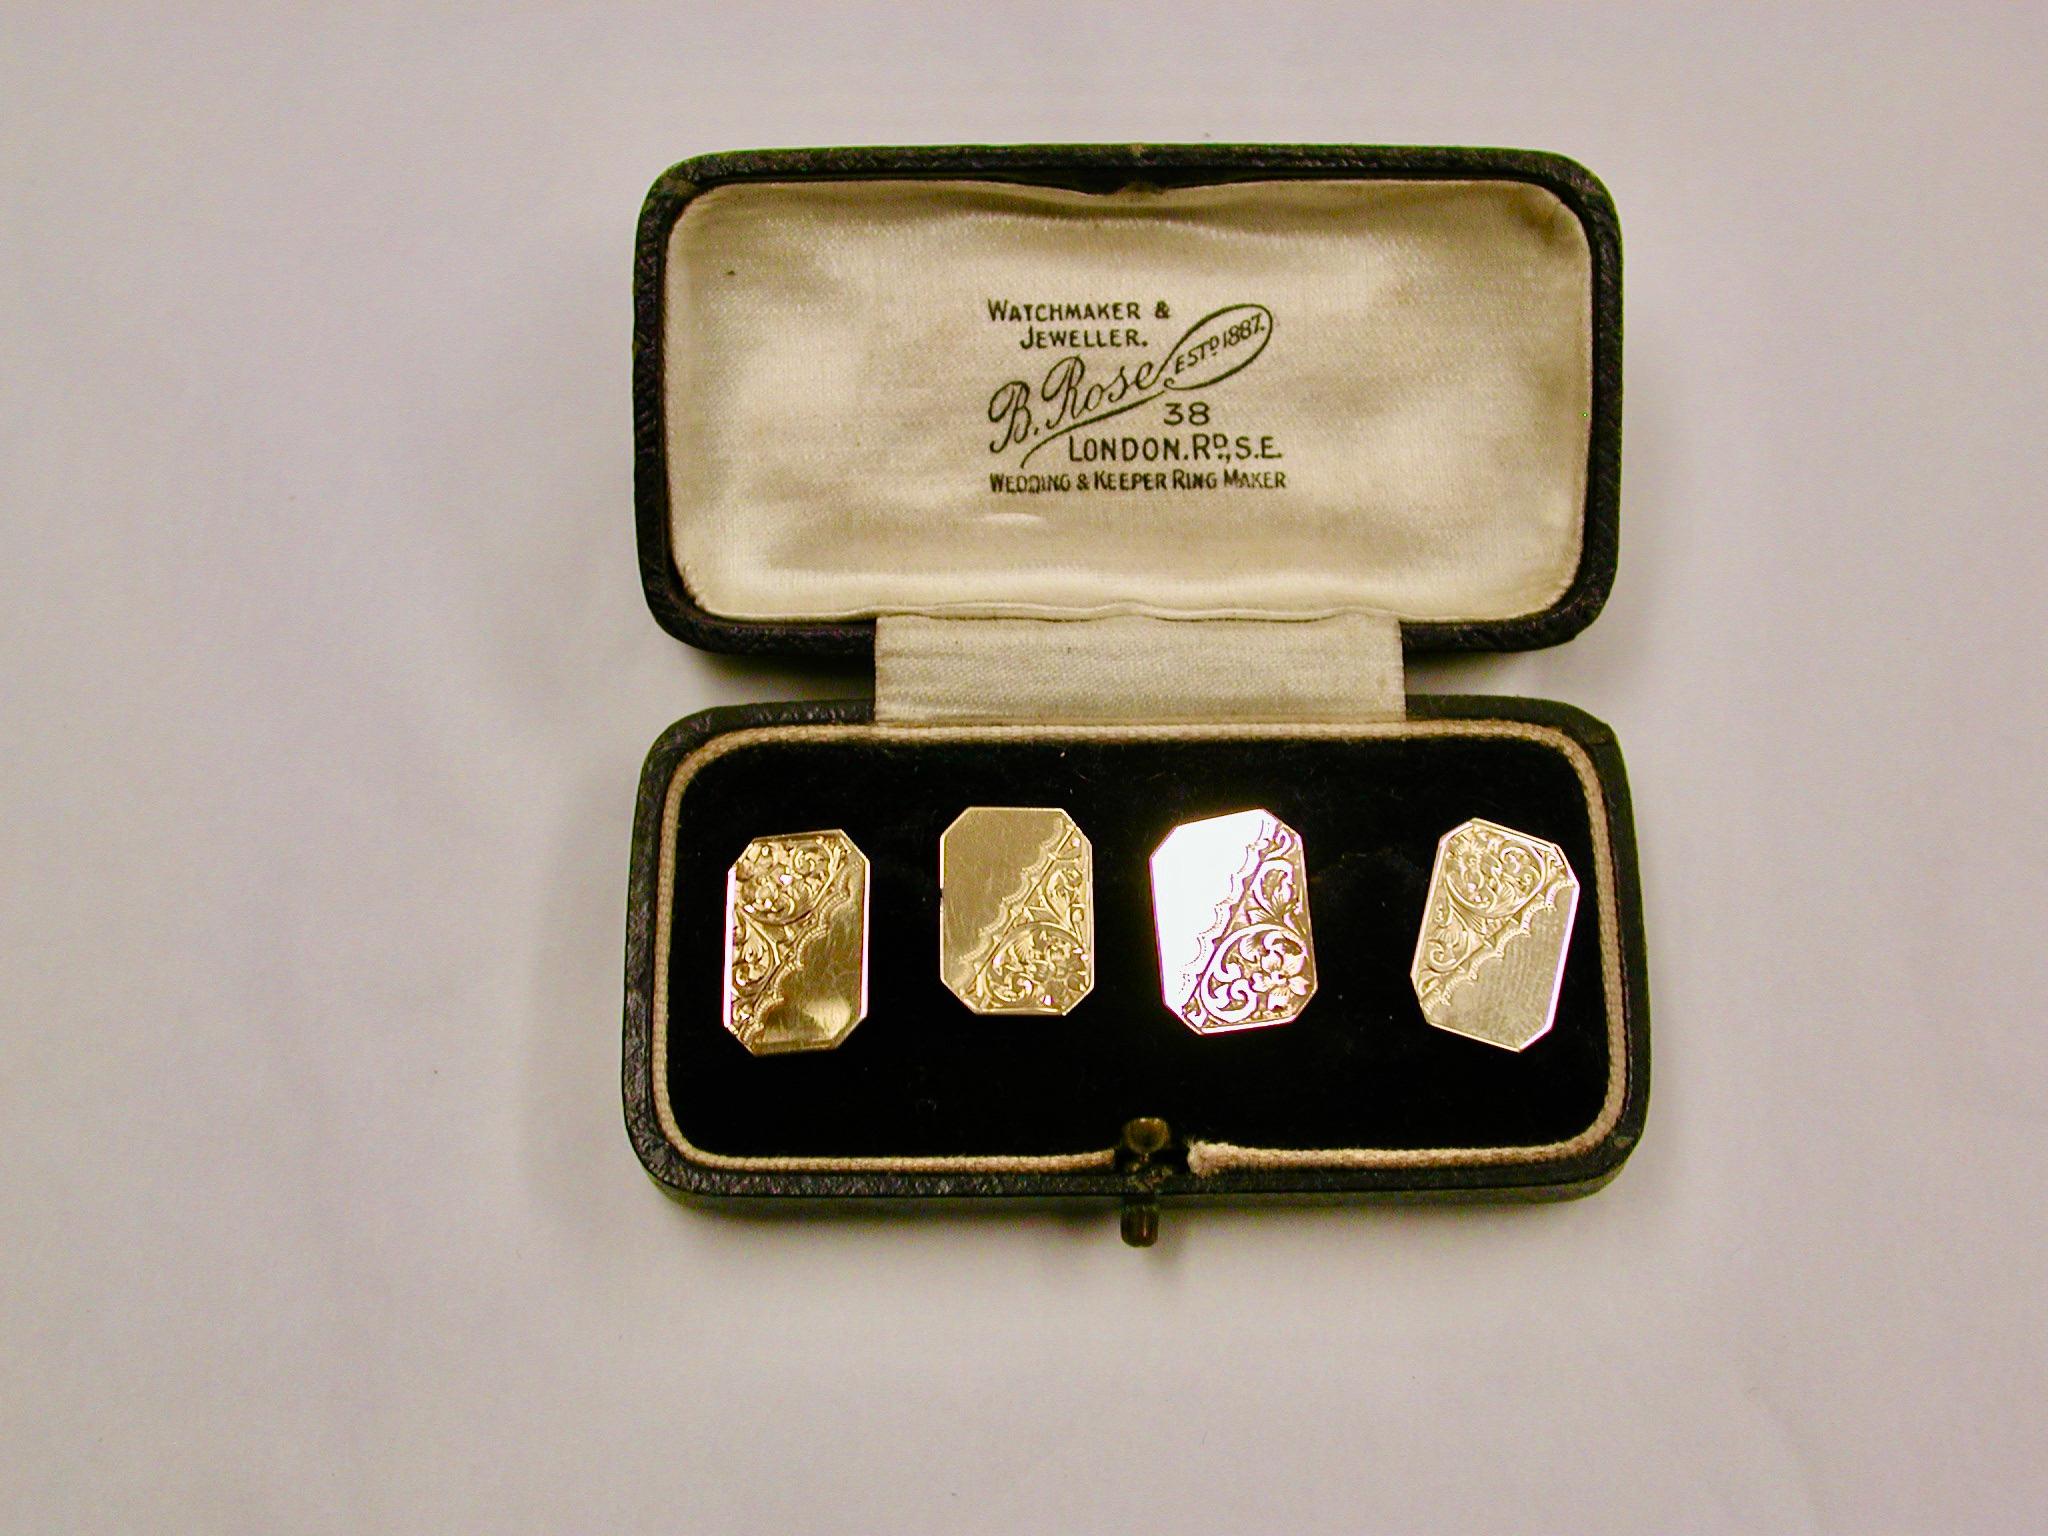 Pair Of 9ct Yellow Gold Cufflinks,Dated 1940,Birmingham
Made by prolific gold jewellery makers Smith & Pepper of Vyse Street,Birmingham.
Lovely hand engraving on each link and in original box.